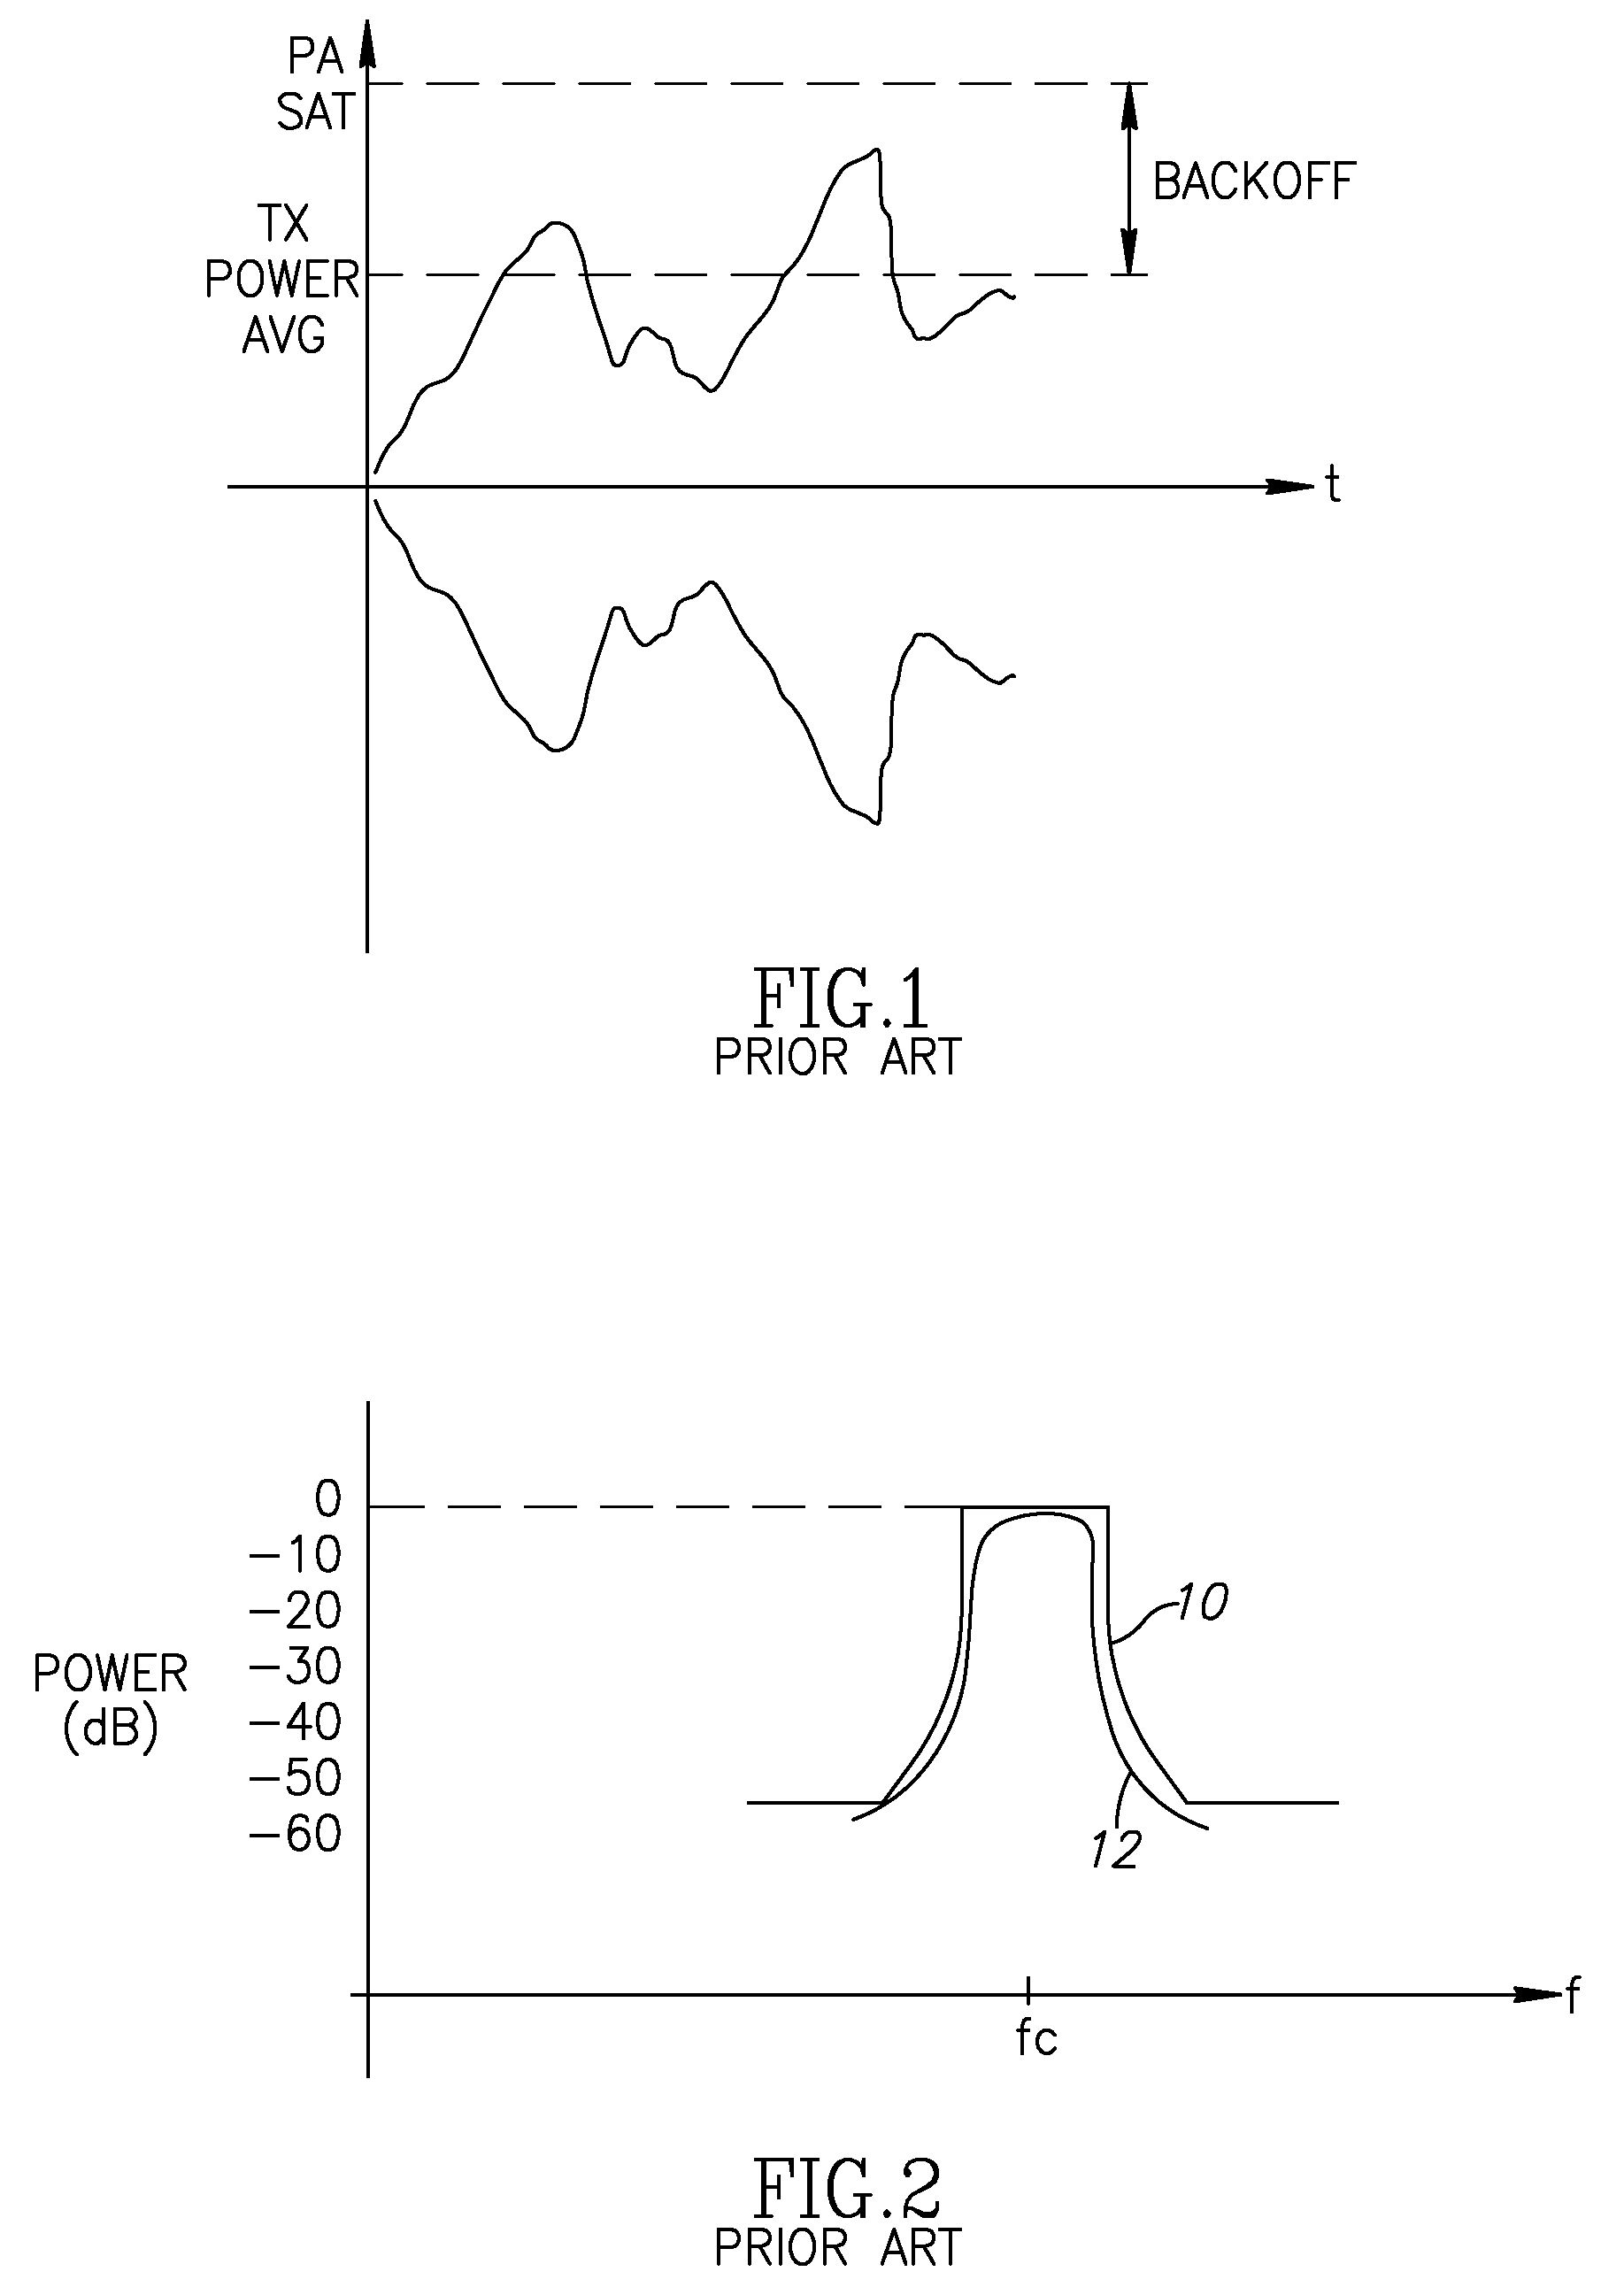 Apparatus for and method of minimizing backoff for orthogonal frequency division multiplexing transmission